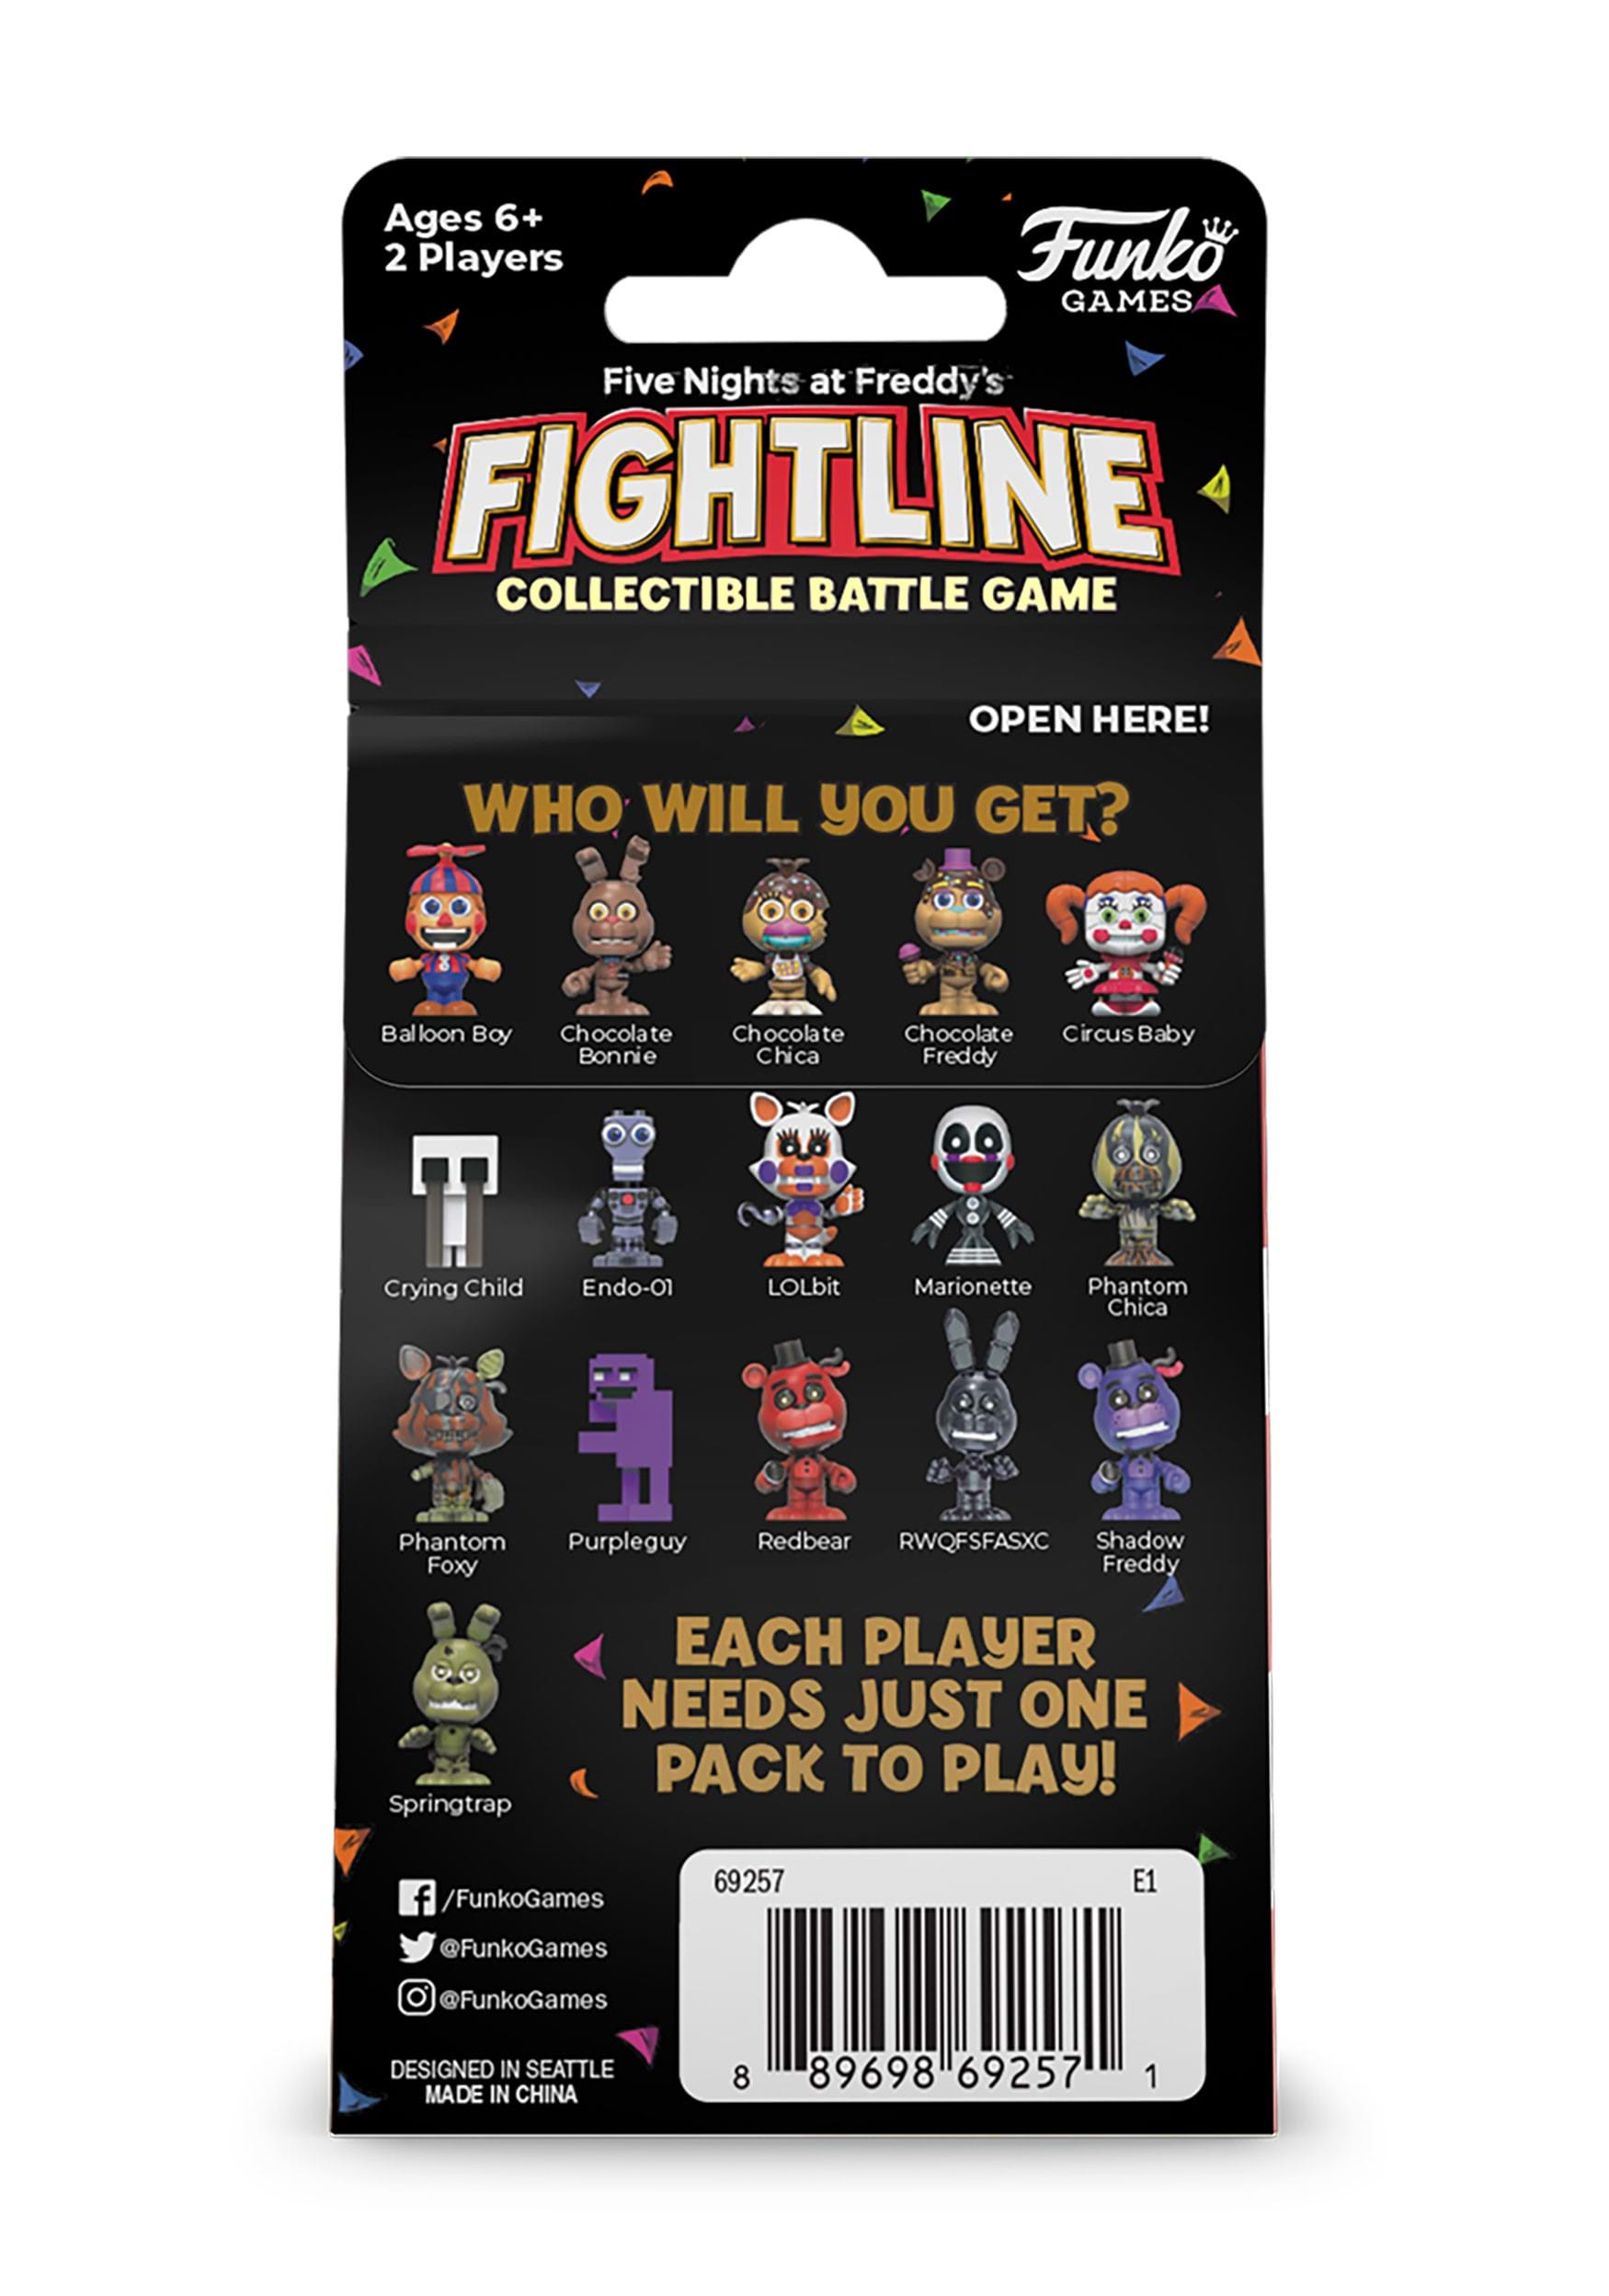 Funko Games Five Nights at Freddy's FightLine Collectible Battle Game  Character Pack (Styles May Vary)